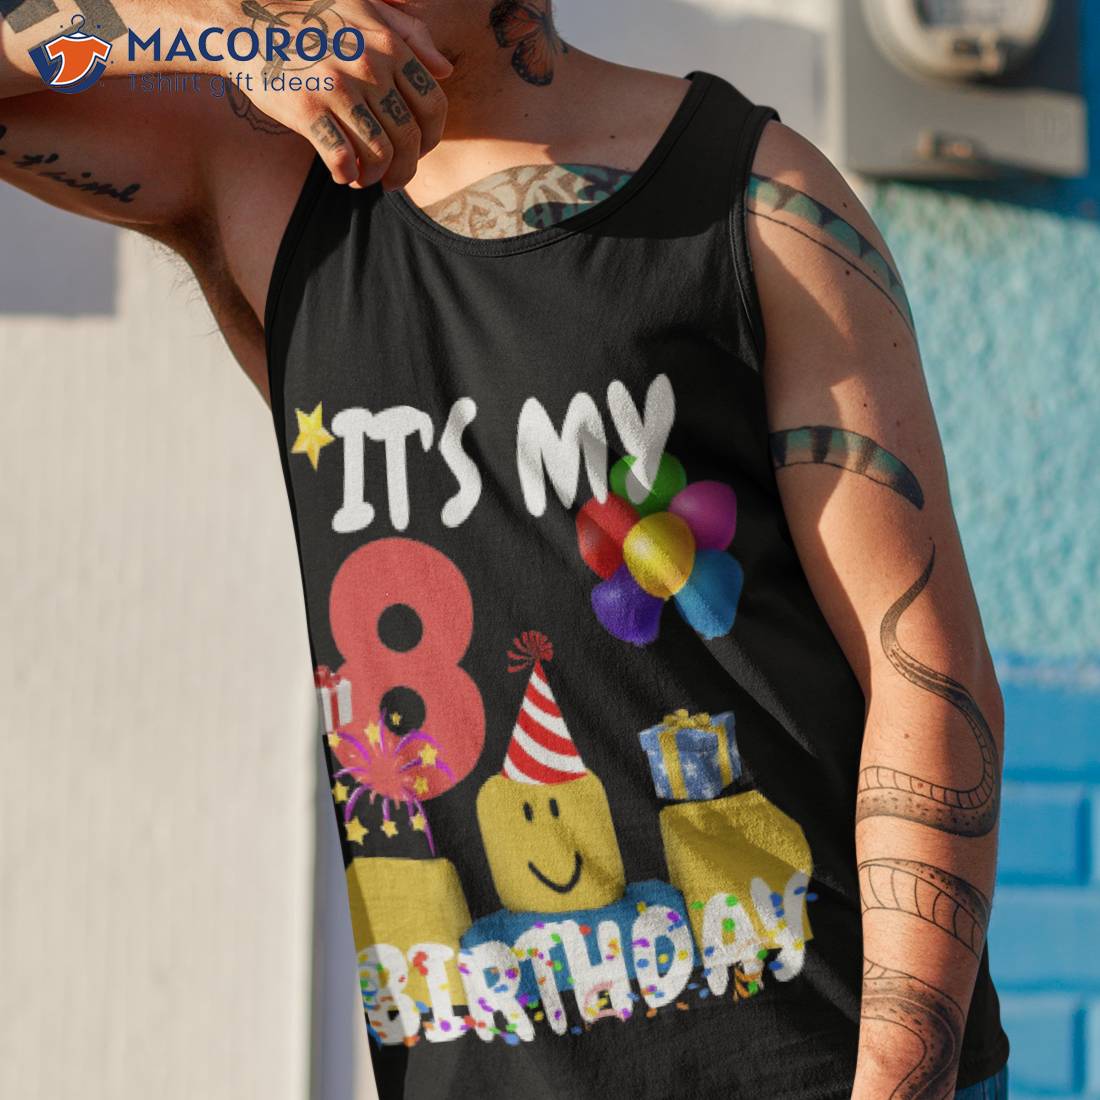 Oof Noob Birthday For Kids For Boys For Girls Roblox Unisex T